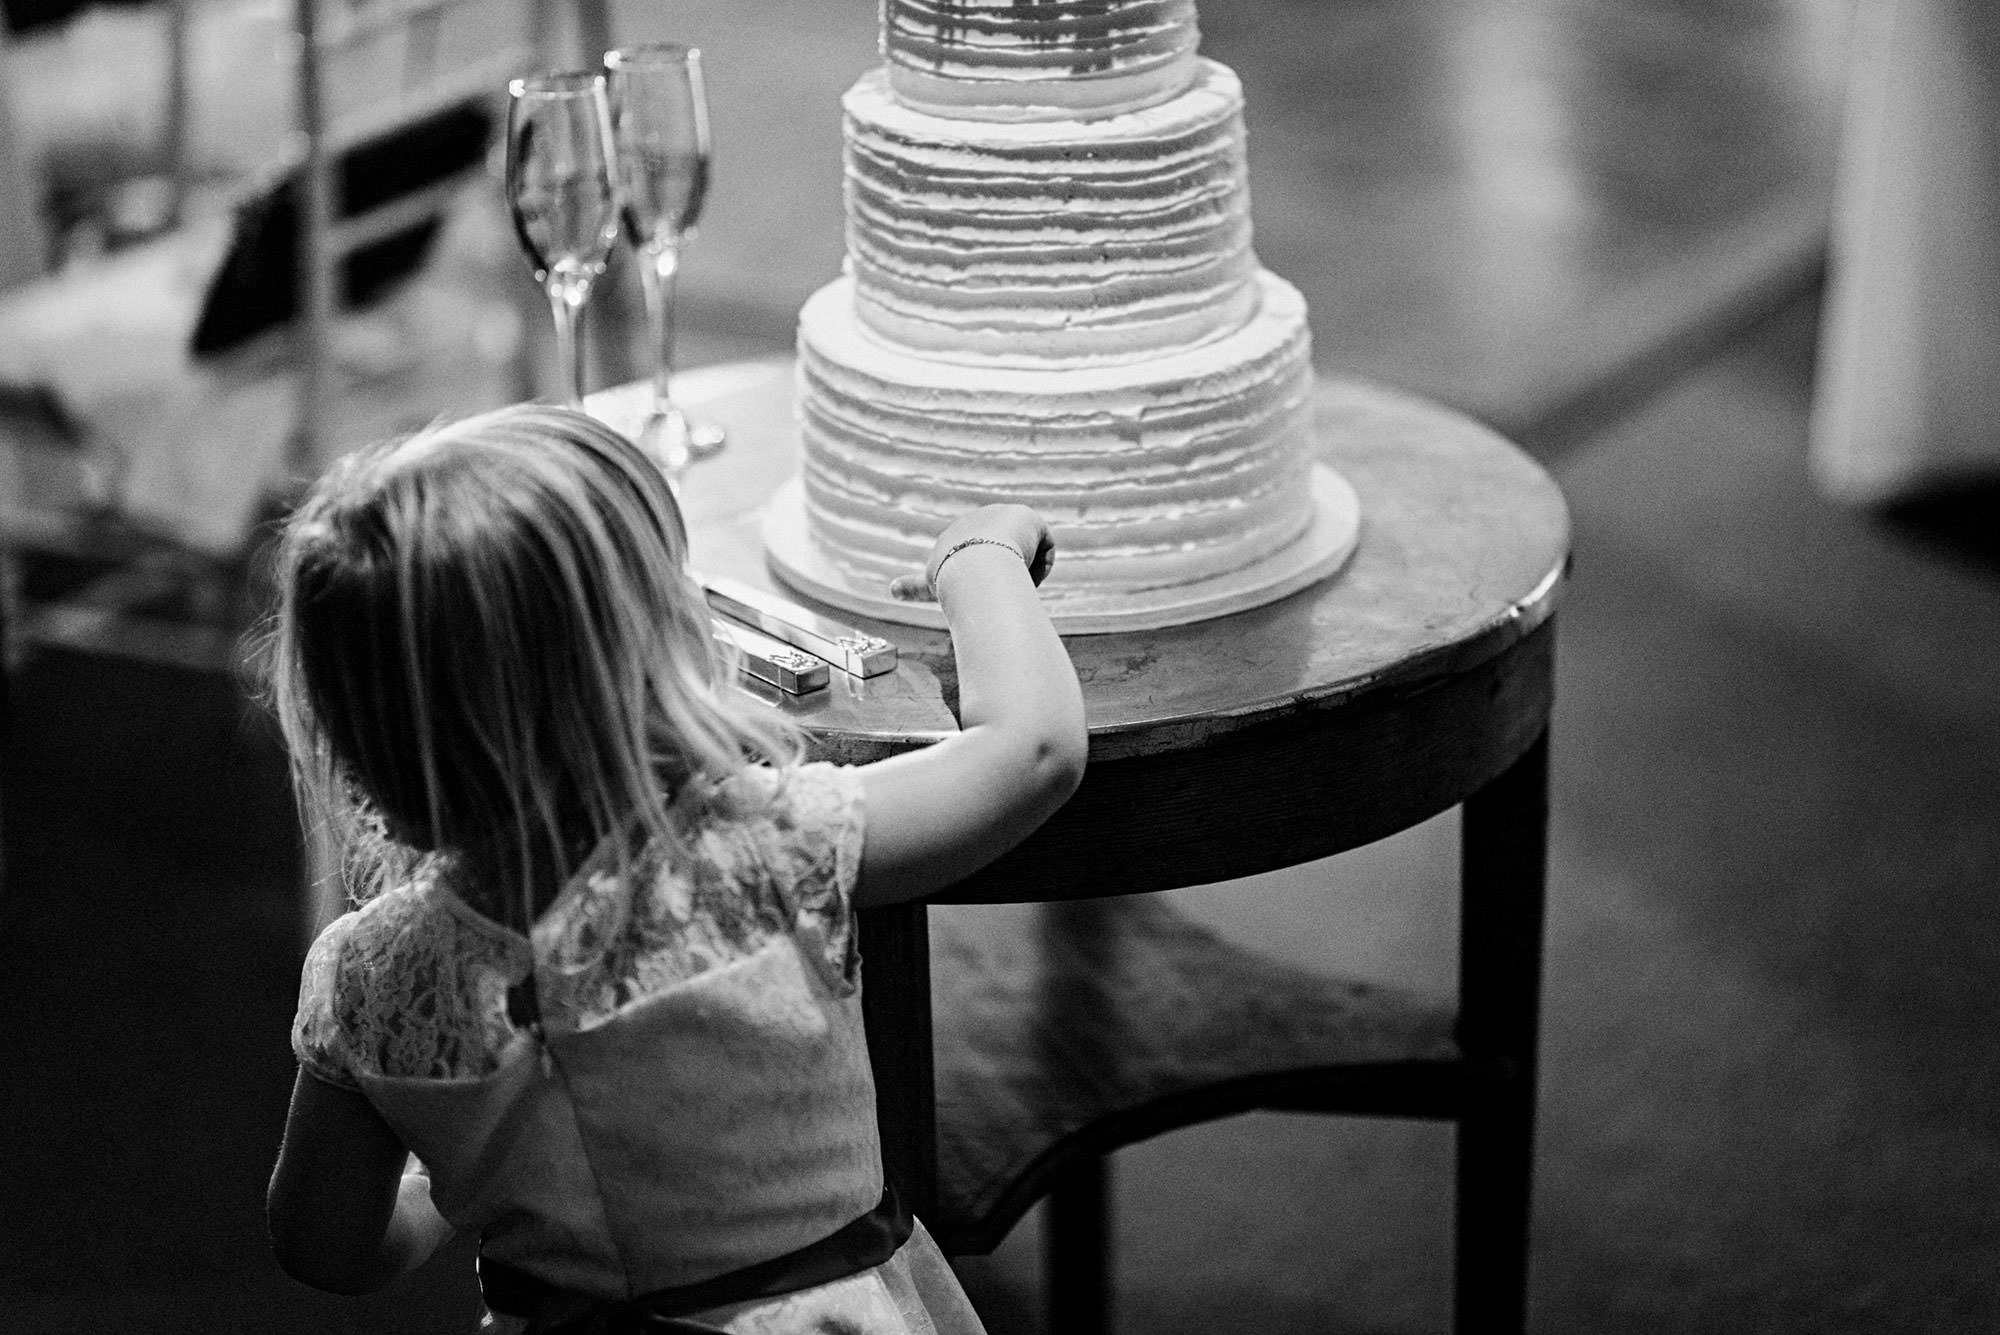 Flowergirl tempted by Wedding Cake